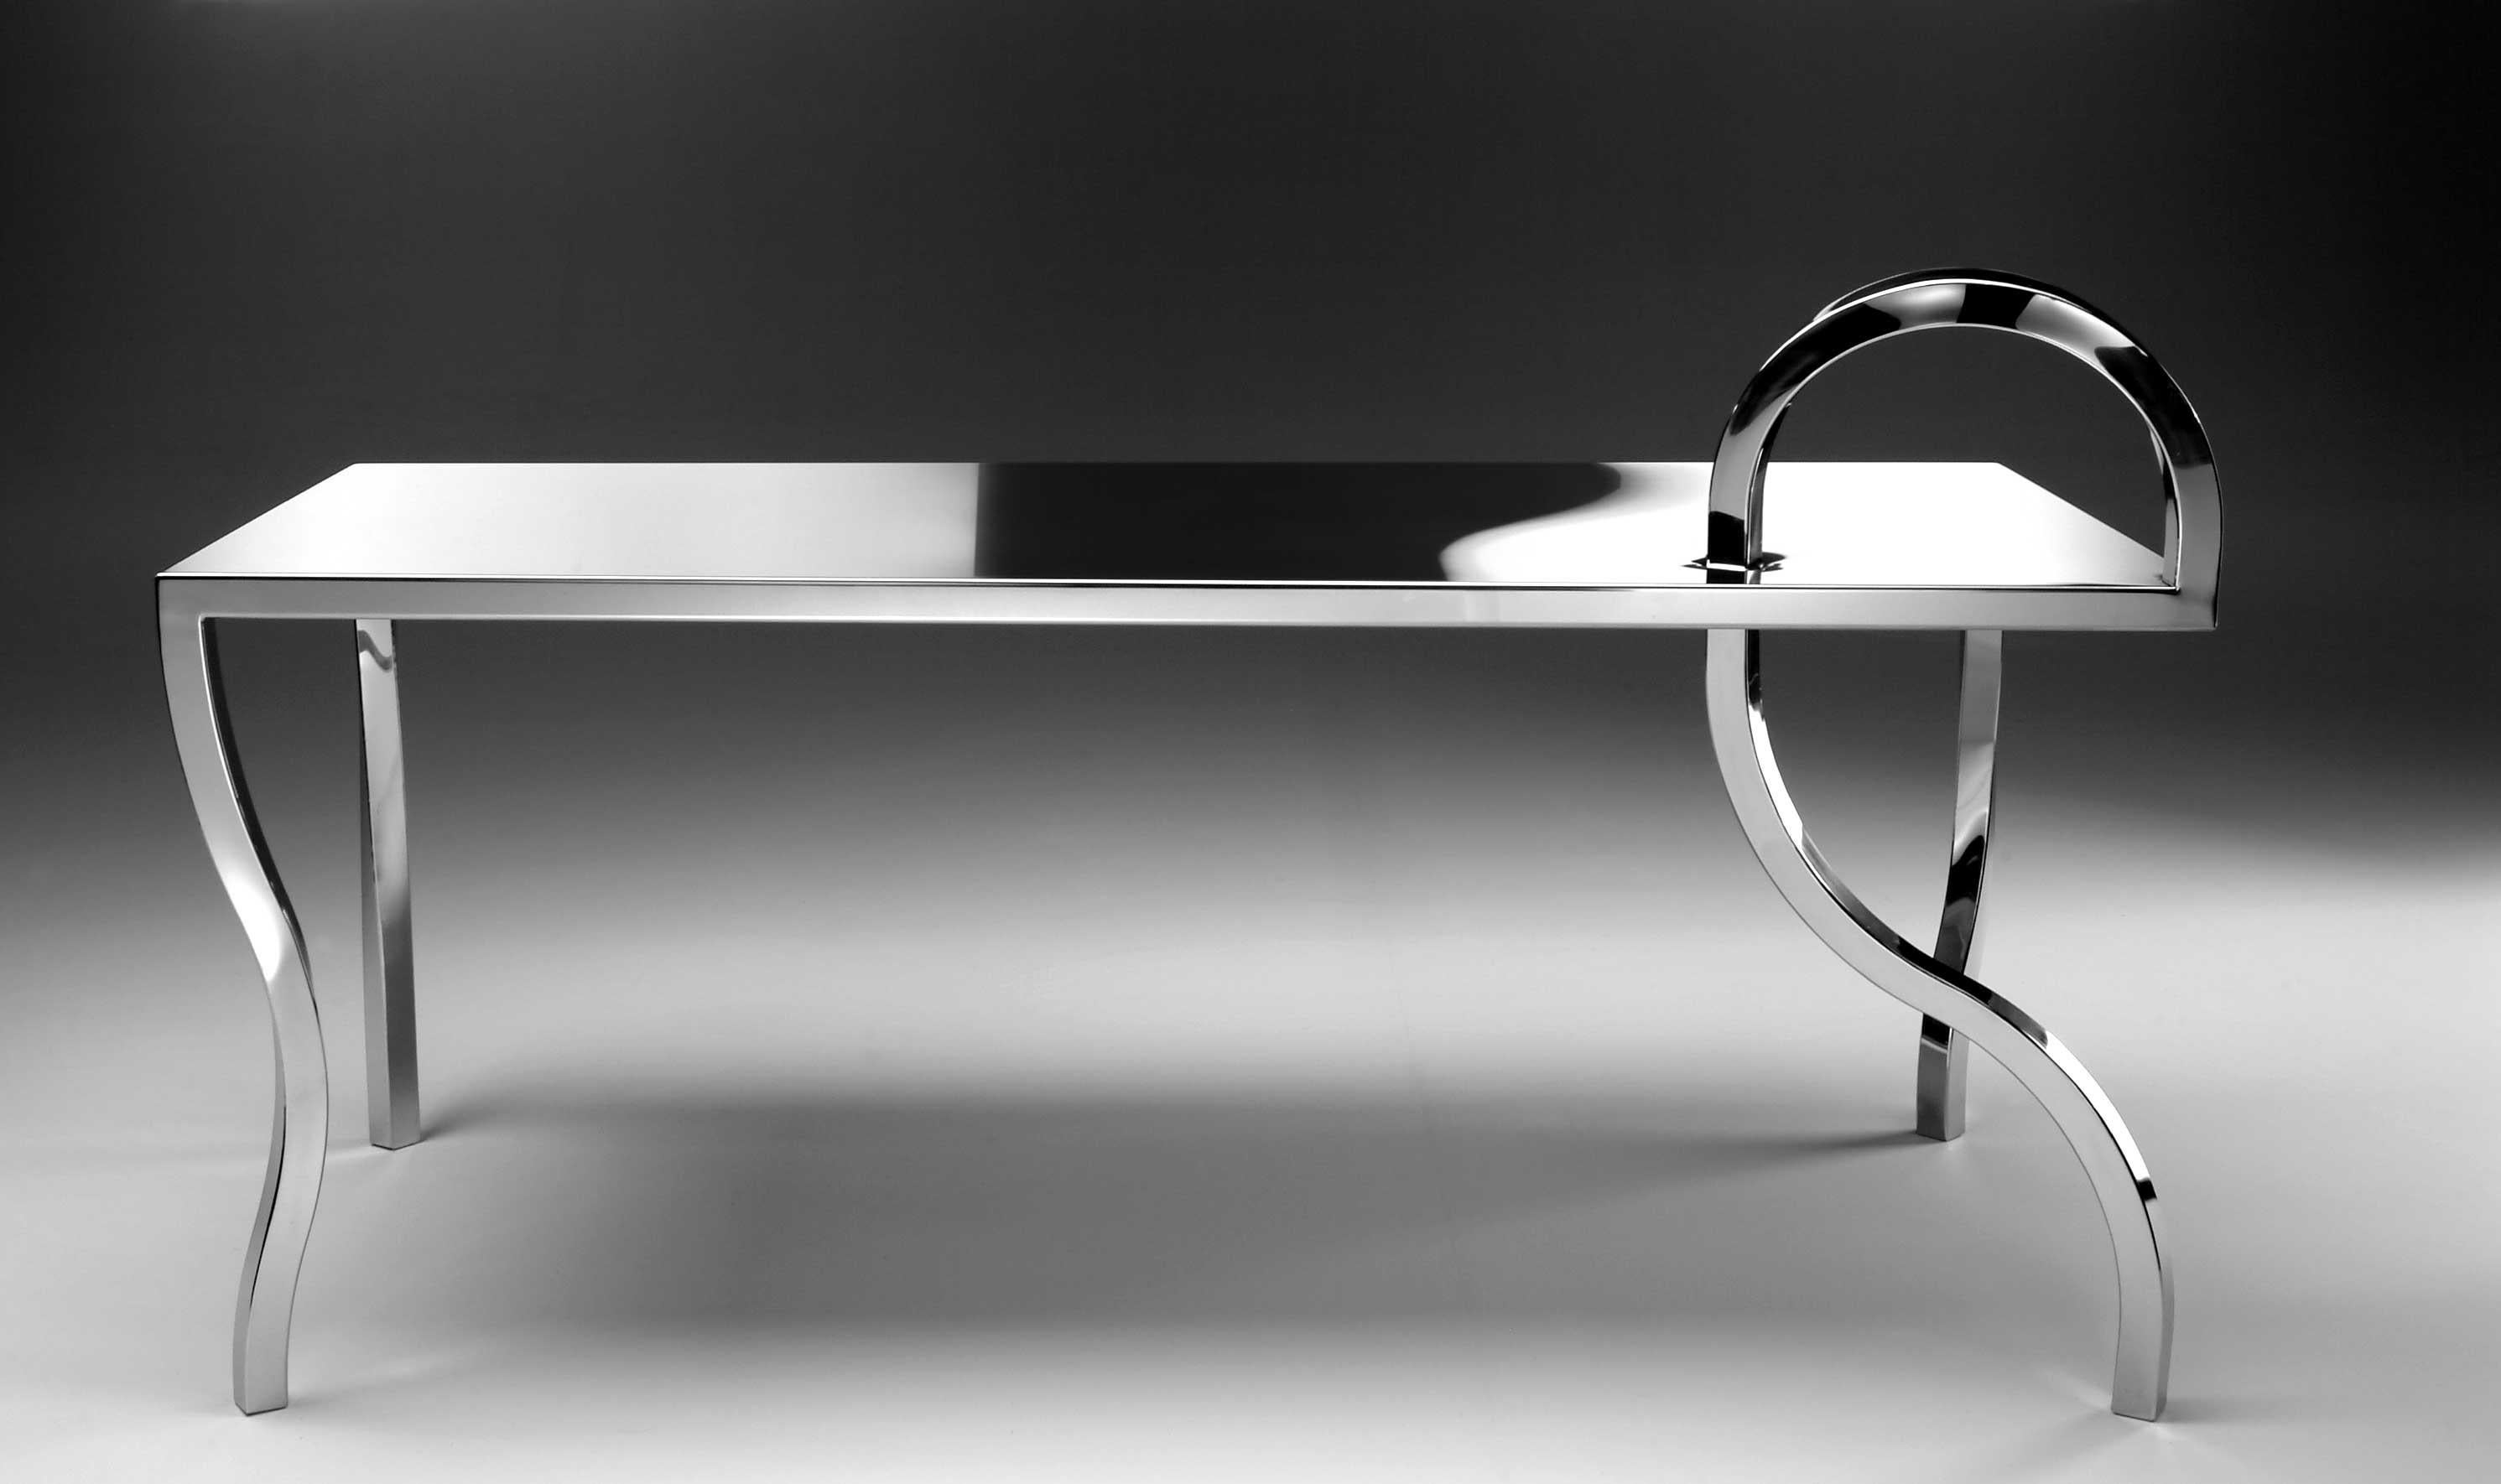 Table - Anomalie Collection designed by Gio Minelli
Materials: Steel
Dimensions: 180 x 80 x h 76 cm

Collection made of polished stainless steel, handmade.
All these pieces have a common character: the curved, twisted legs. An idea of rebellion but